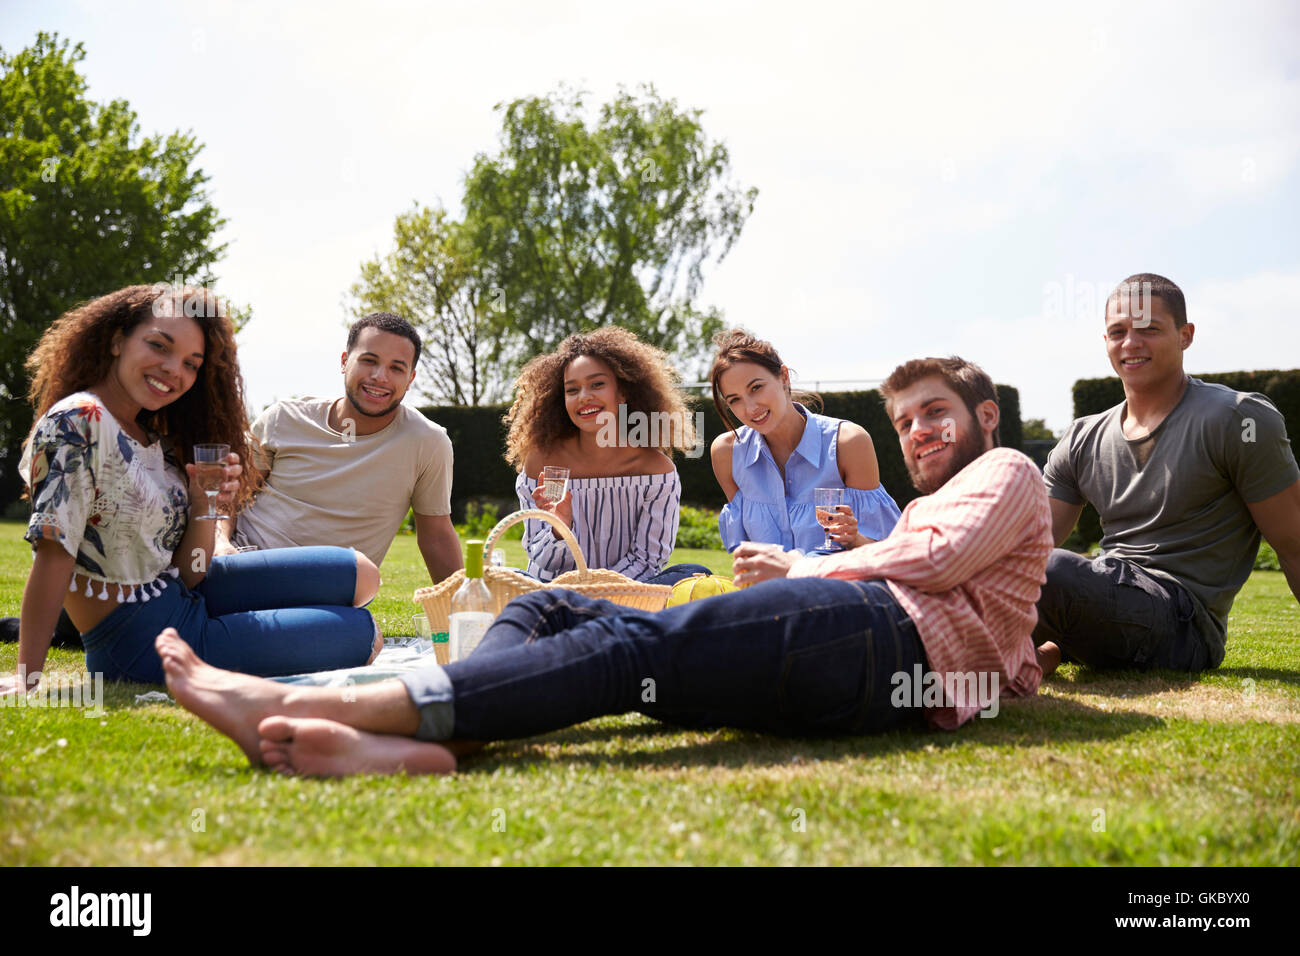 Group of young adult friends having a picnic look to camera Stock Photo